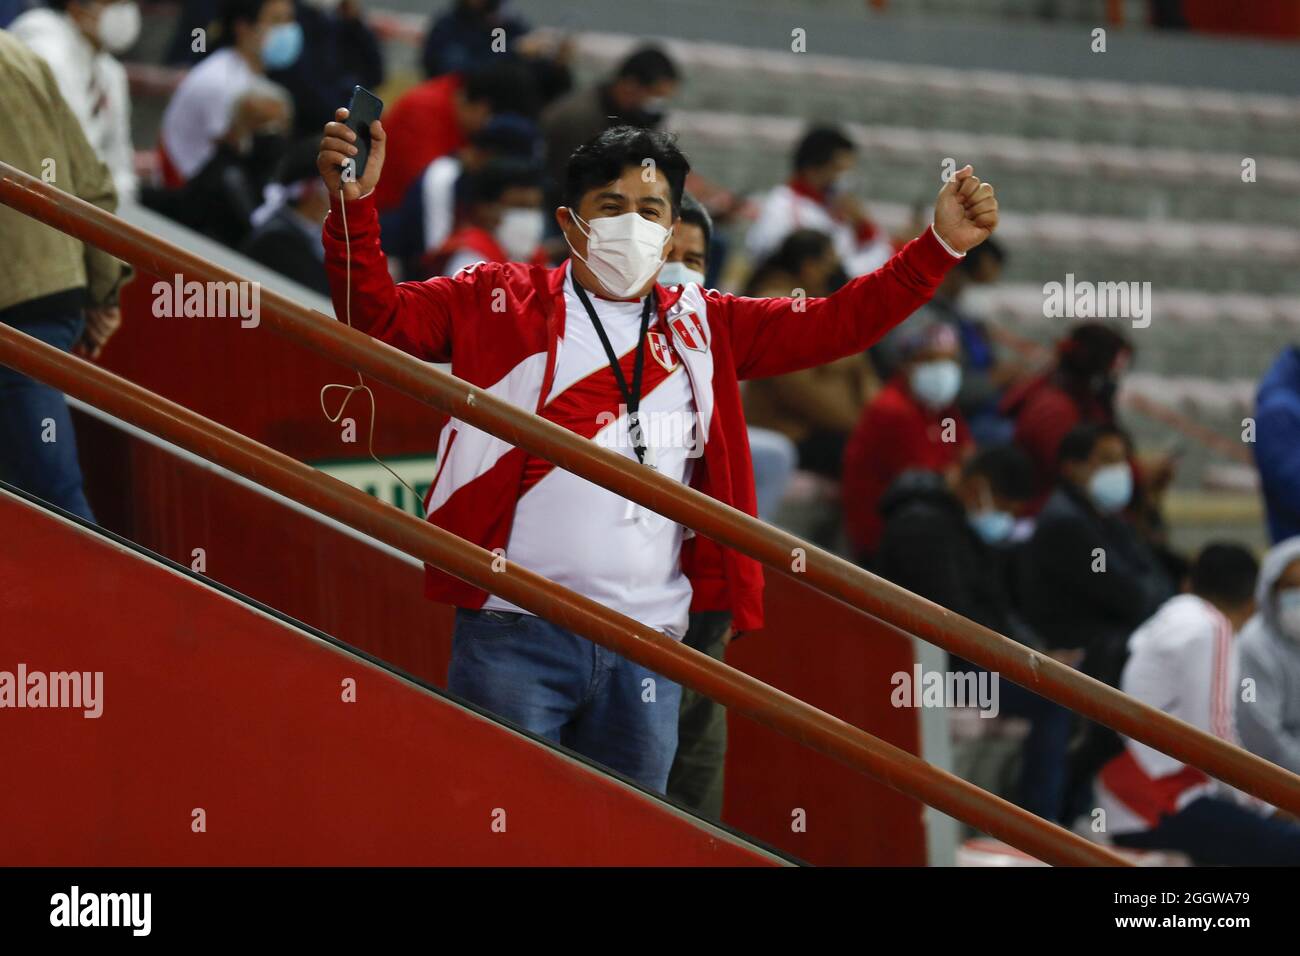 Lima, Peru. 02nd Sep, 2021. Fans return to the stadium at the 2022 Football World Cup Qualifier between Peru adn Uruguay at the Estádio Nacional del Peru in Lima, Peru. The game ended 1-1 with Tapia scoring for the hosts in the 24th minute and de Arrascaeta equalizing for Uruguay in the 29th. Credit: SPP Sport Press Photo. /Alamy Live News Stock Photo